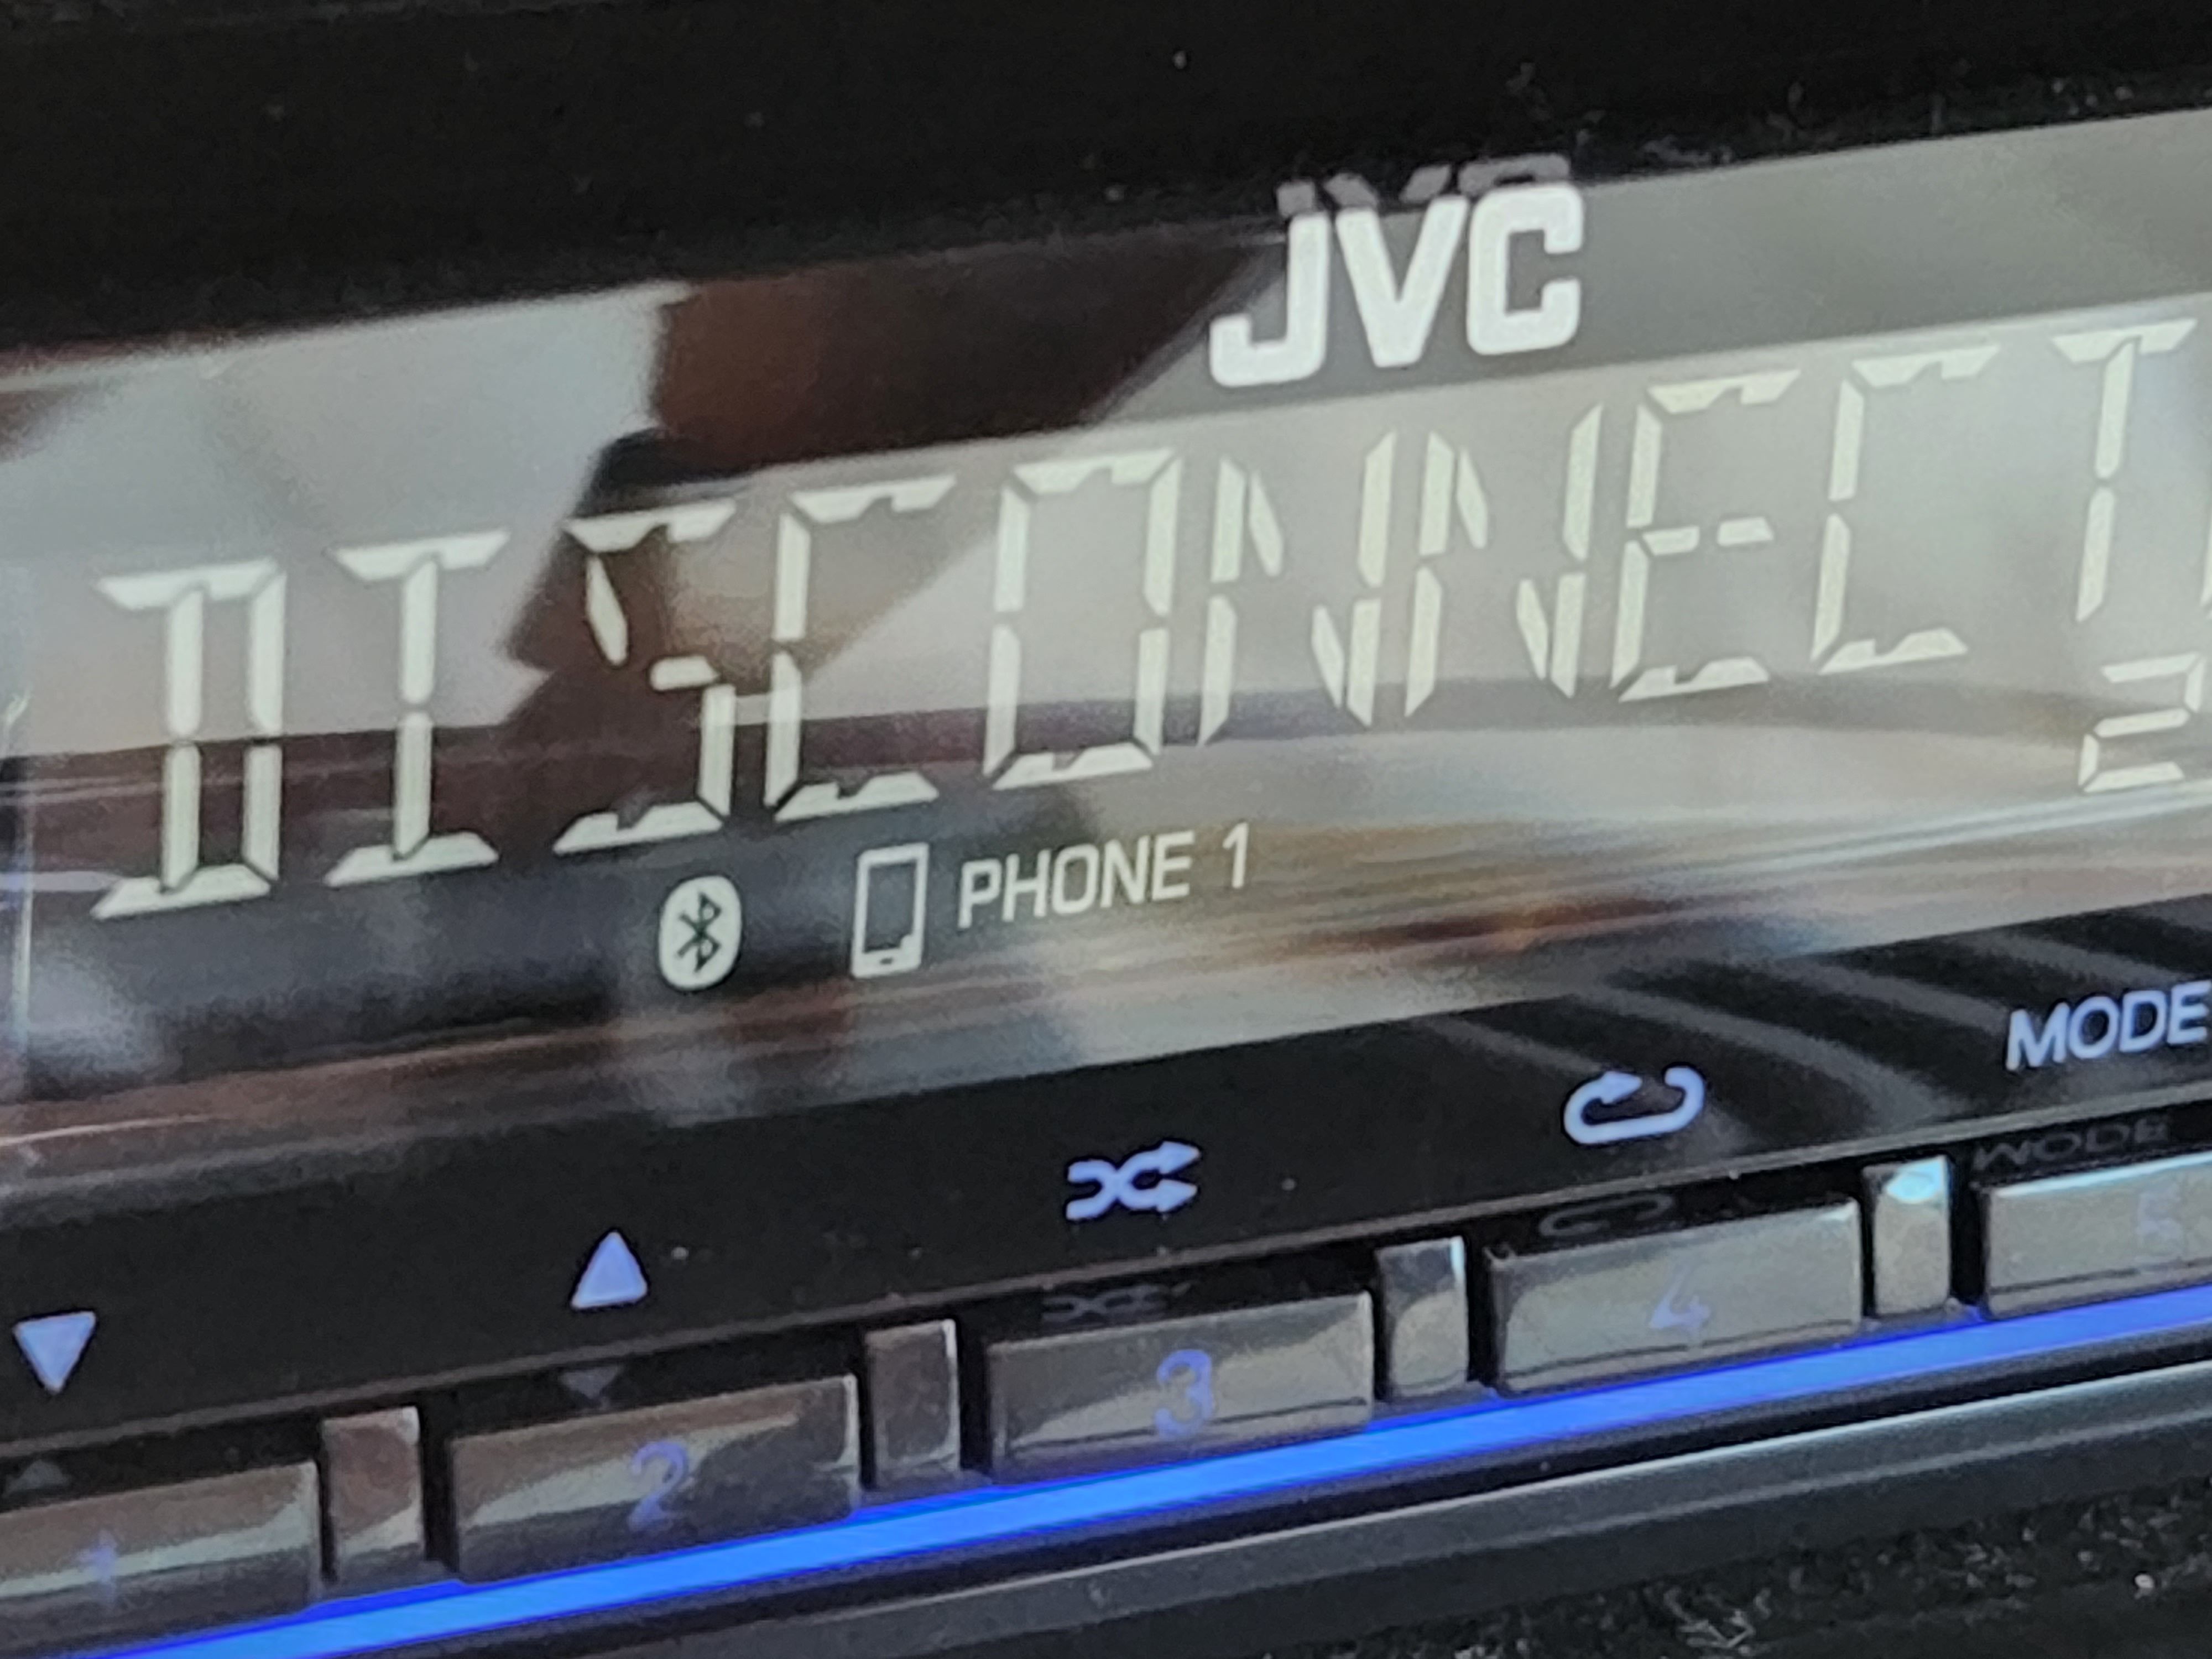 Bluetooth in Car Works for Phone Calls Not Audio in JVC Car Stereo -  Samsung Community